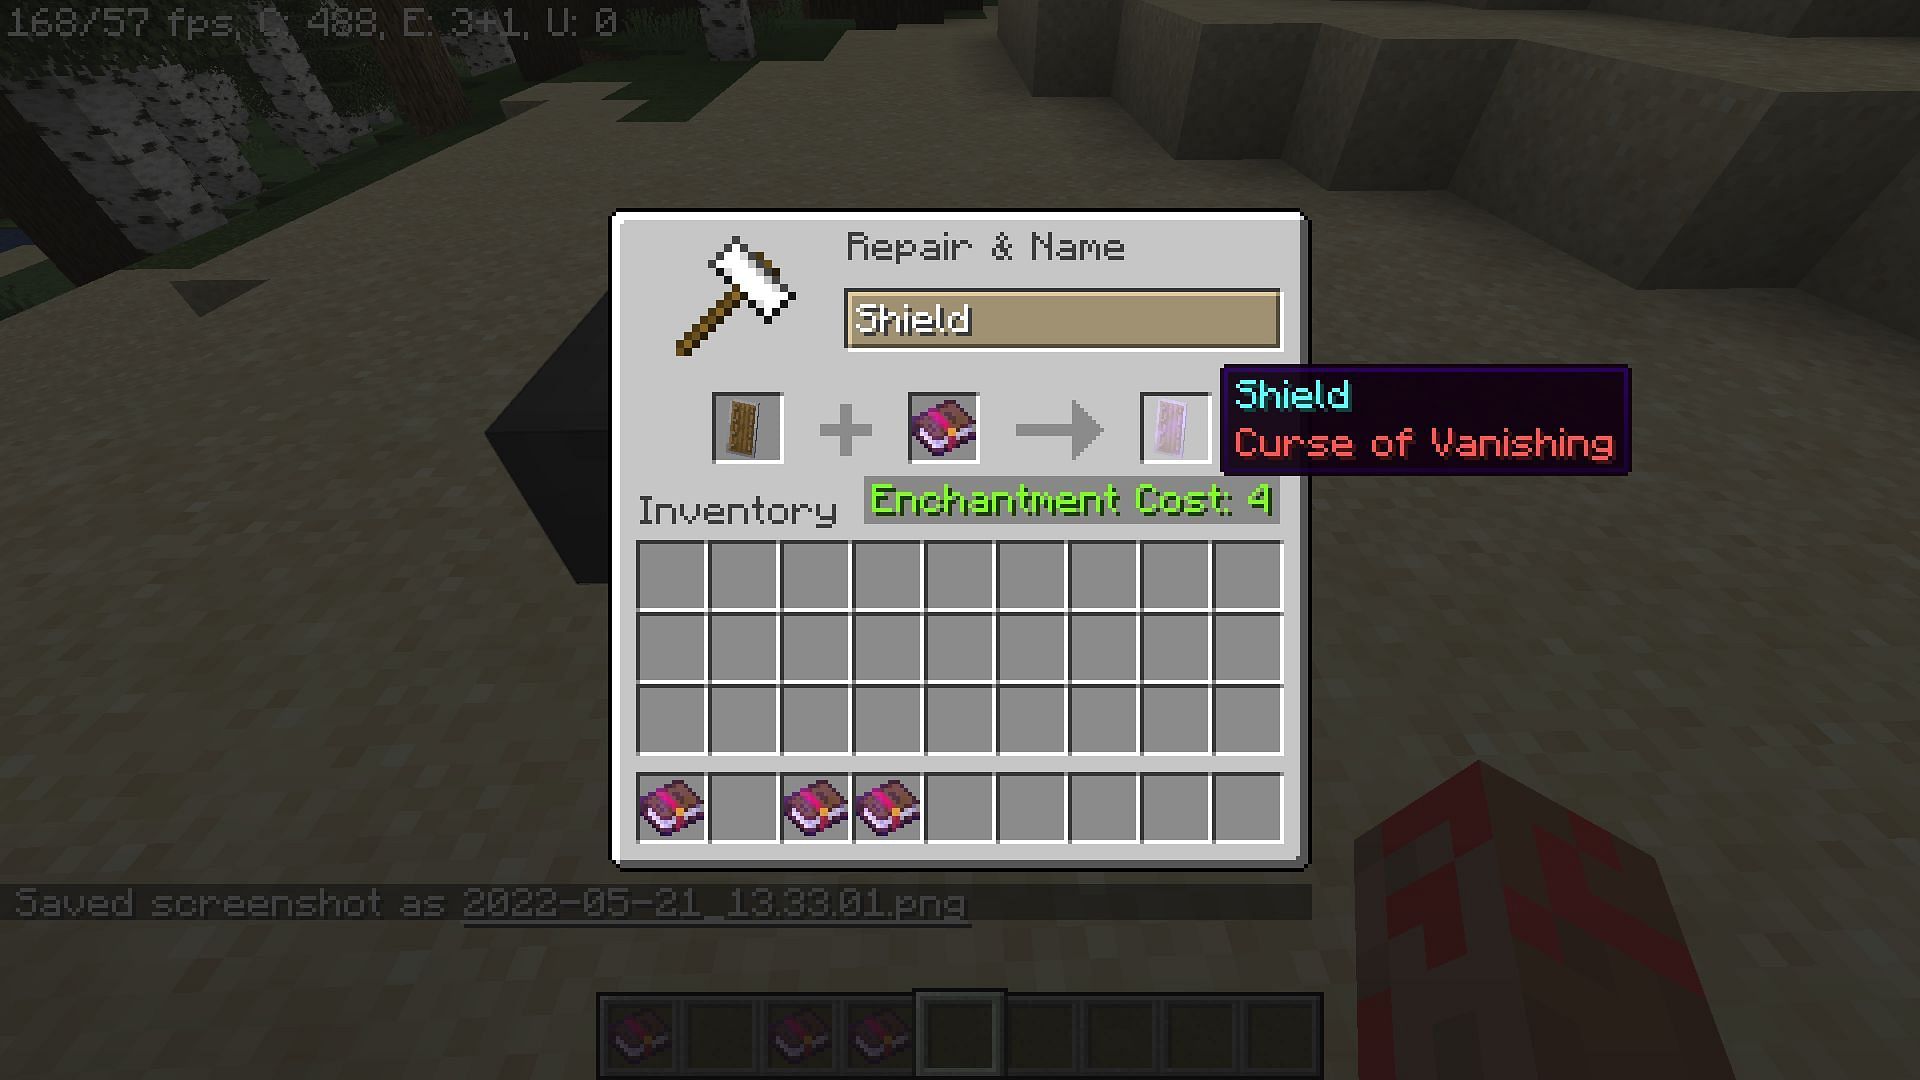 Curse of vanishing is a negative powerup that vanishes the item after the player dies (Image via Minecraft)